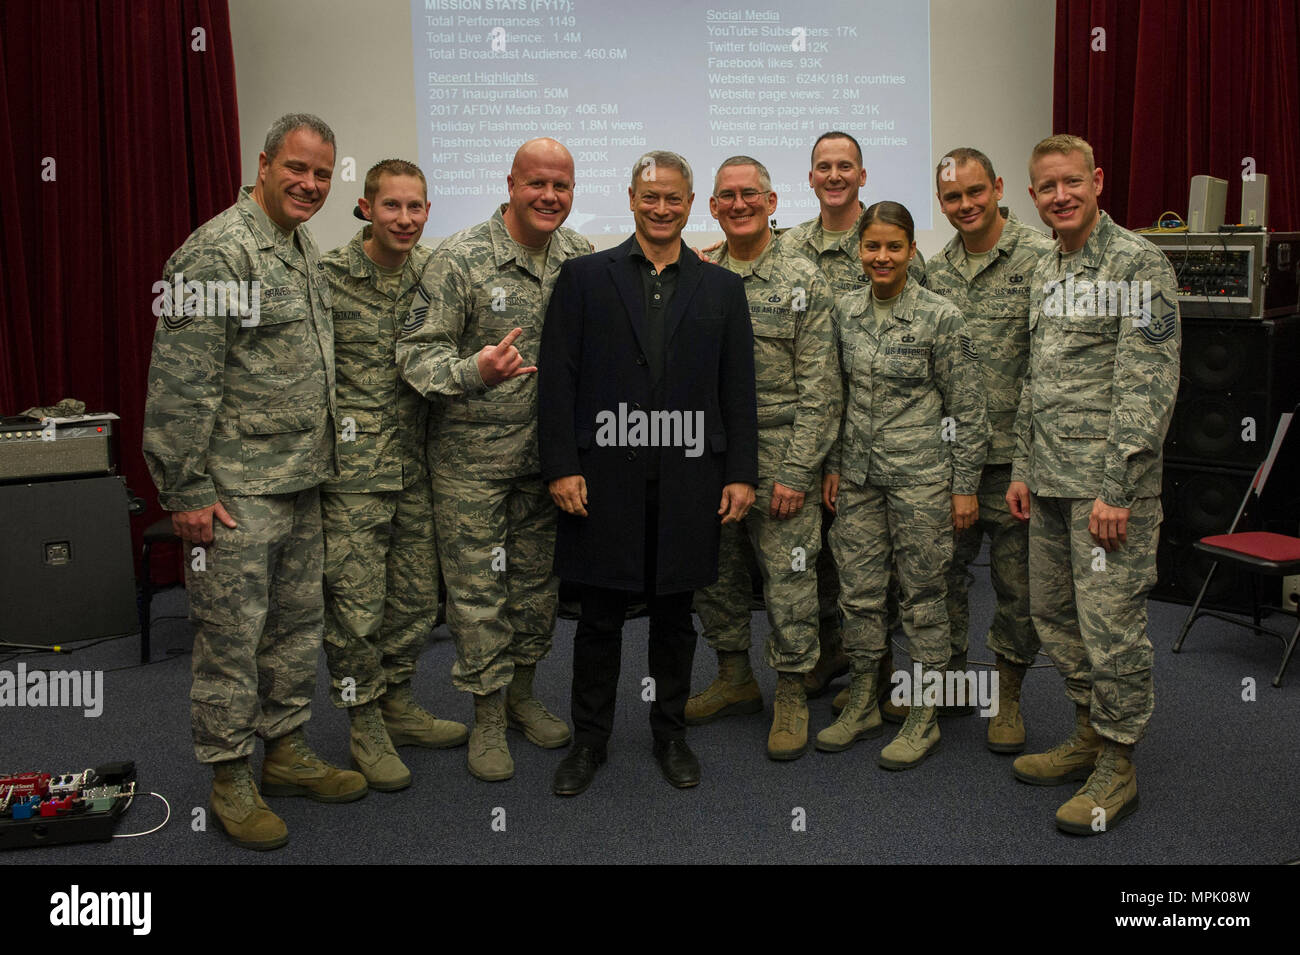 Actor Gary Sinise poses for a photo with Max Impact, the premier United States Air Force rock band as he visits the United States Air Force Band building at Joint Base Anacostia-Bolling, Washington D.C., as part of a USO tour Mar. 21, 2017. (Photo by Senior Master Sgt. Adrian Cadiz)(Released) Stock Photo